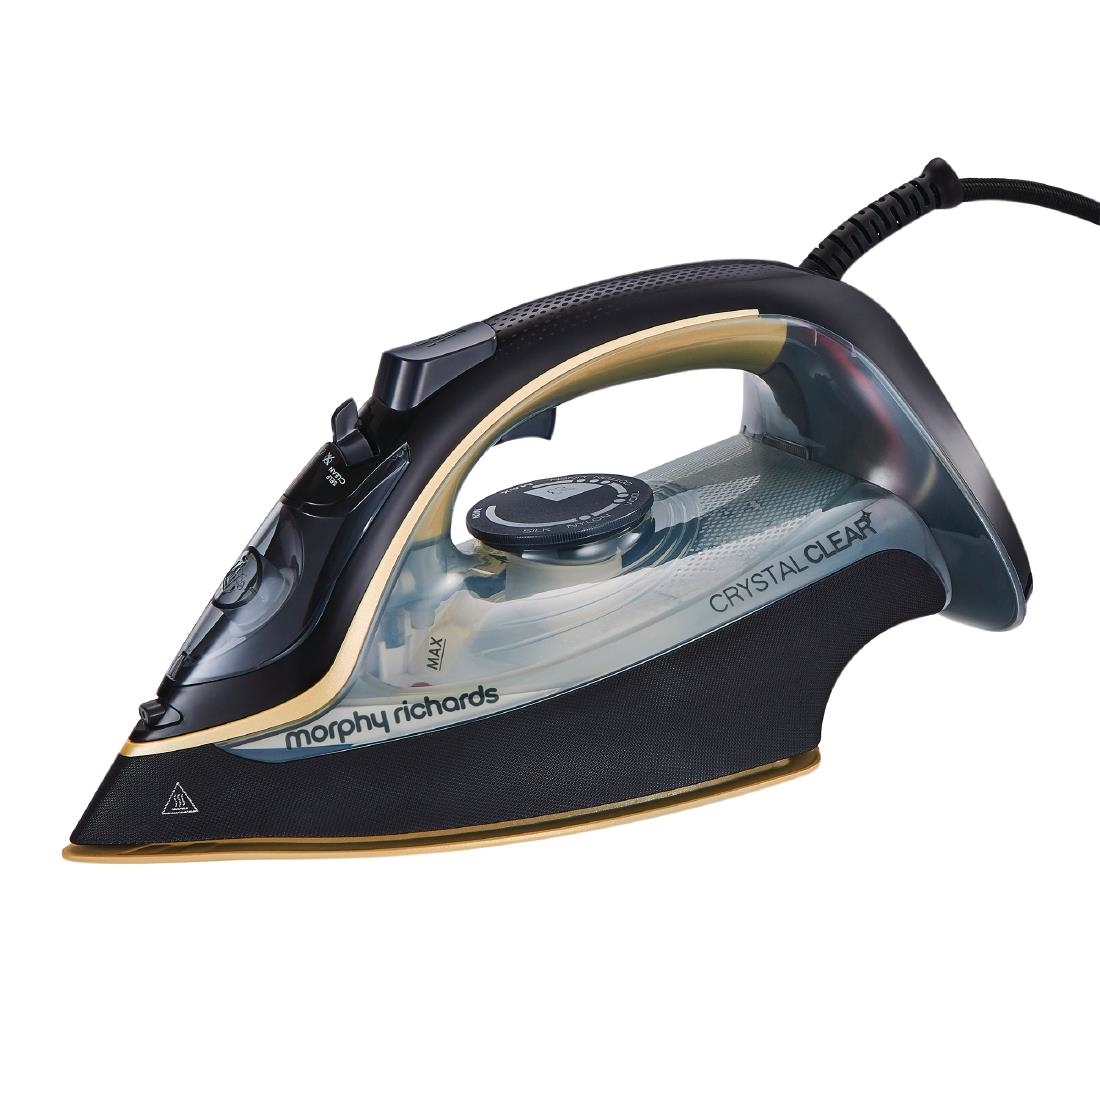 Morphy Richards Crystal Clear Steam Iron 300302